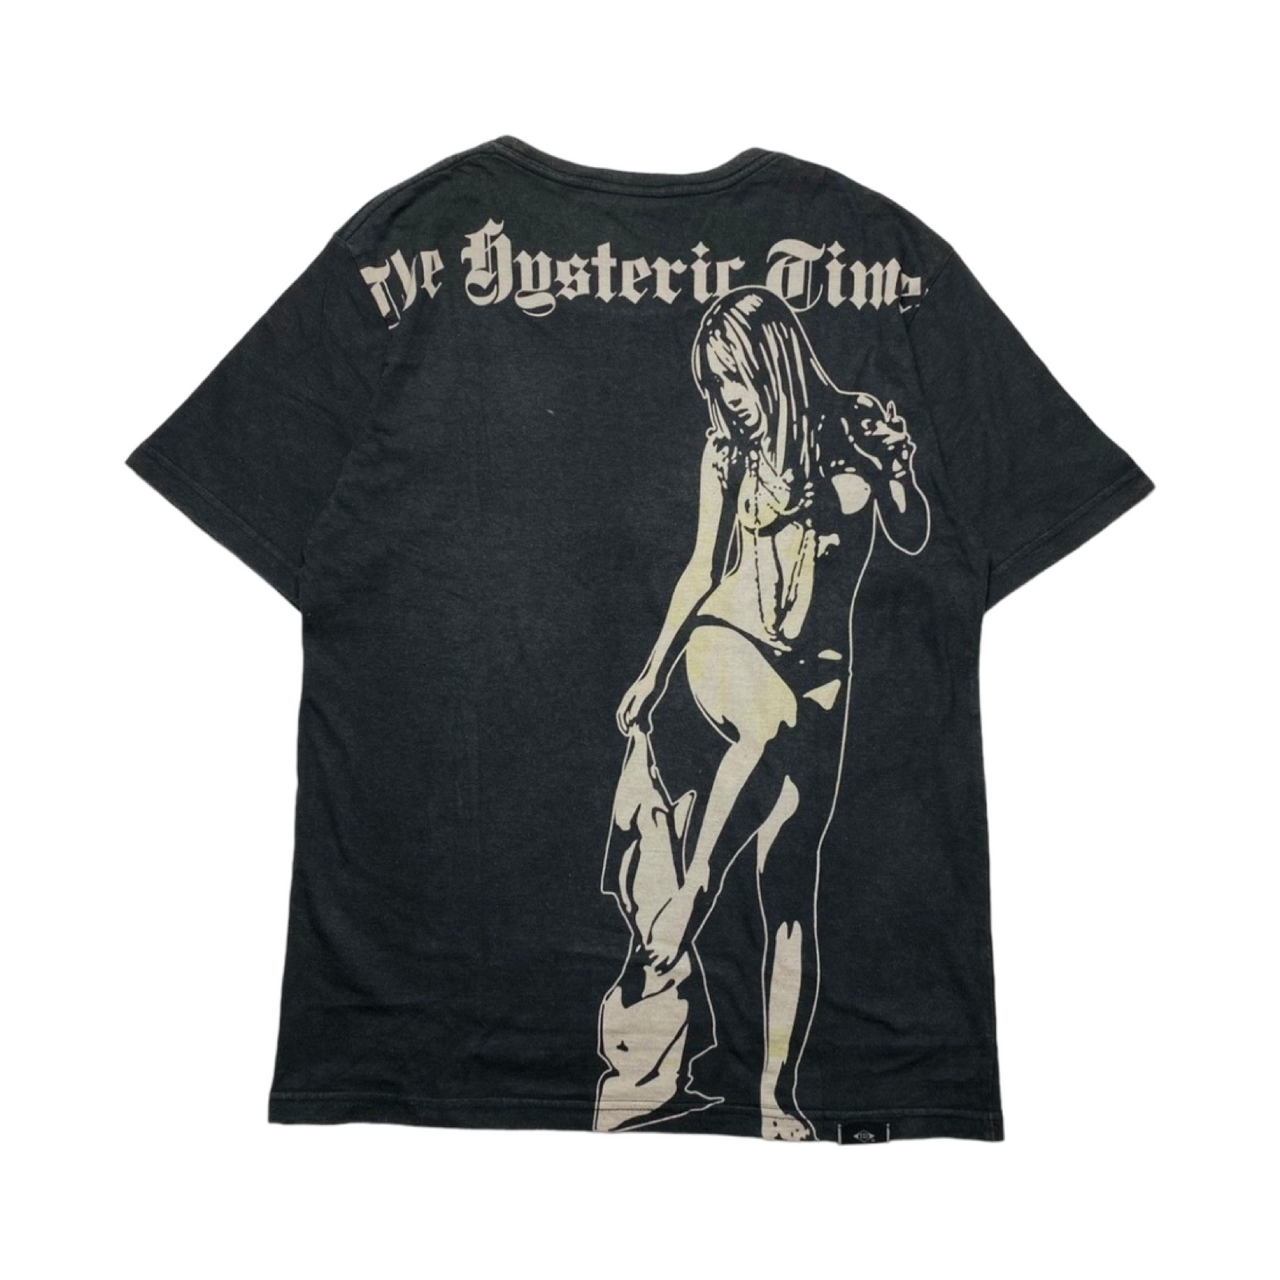 2000s Hysteric Glamour “Hysteric Times Printed” T-Shirt